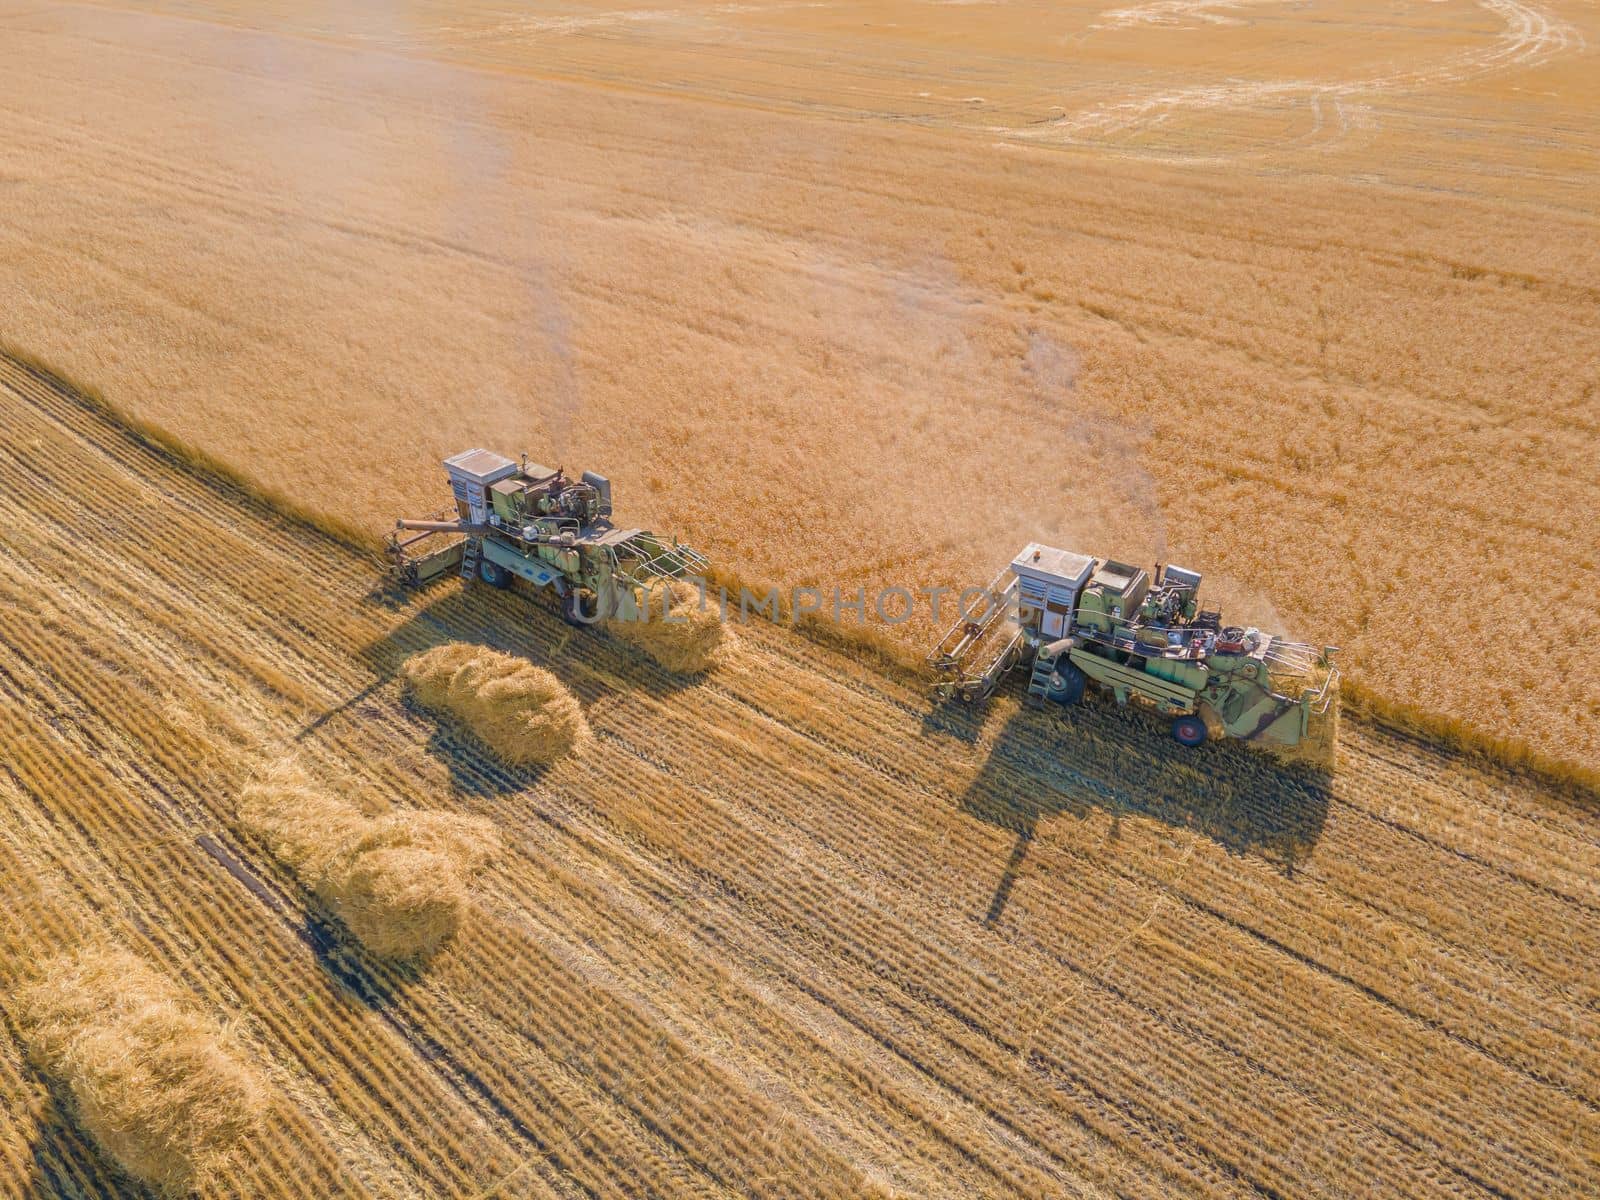 Harvest wheat grain and crop aerial view.Harvesting wheat,oats, barley in fields,ranches and farmlands.Combines mow in the field.Agro-industry.Combine Harvester Cutting on wheat filed.Machine harvest by YevgeniySam